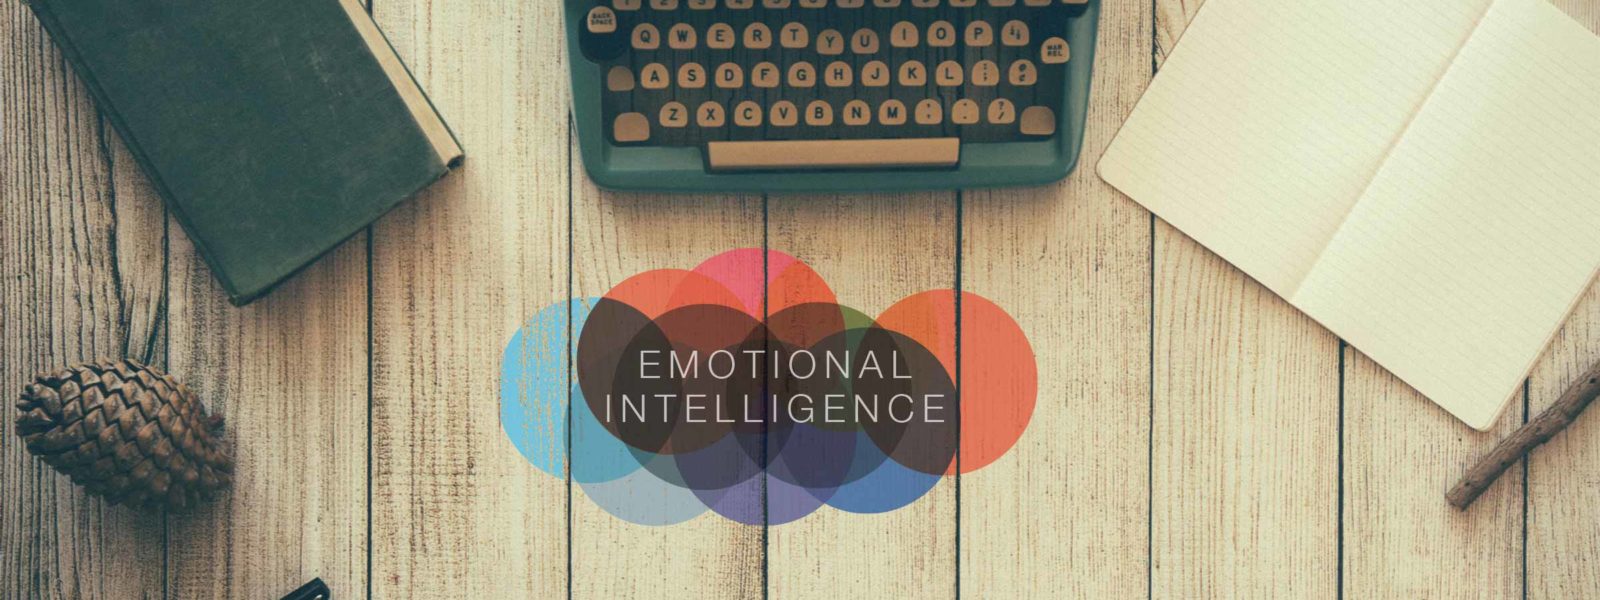 Subscribe for emotional intelligence.